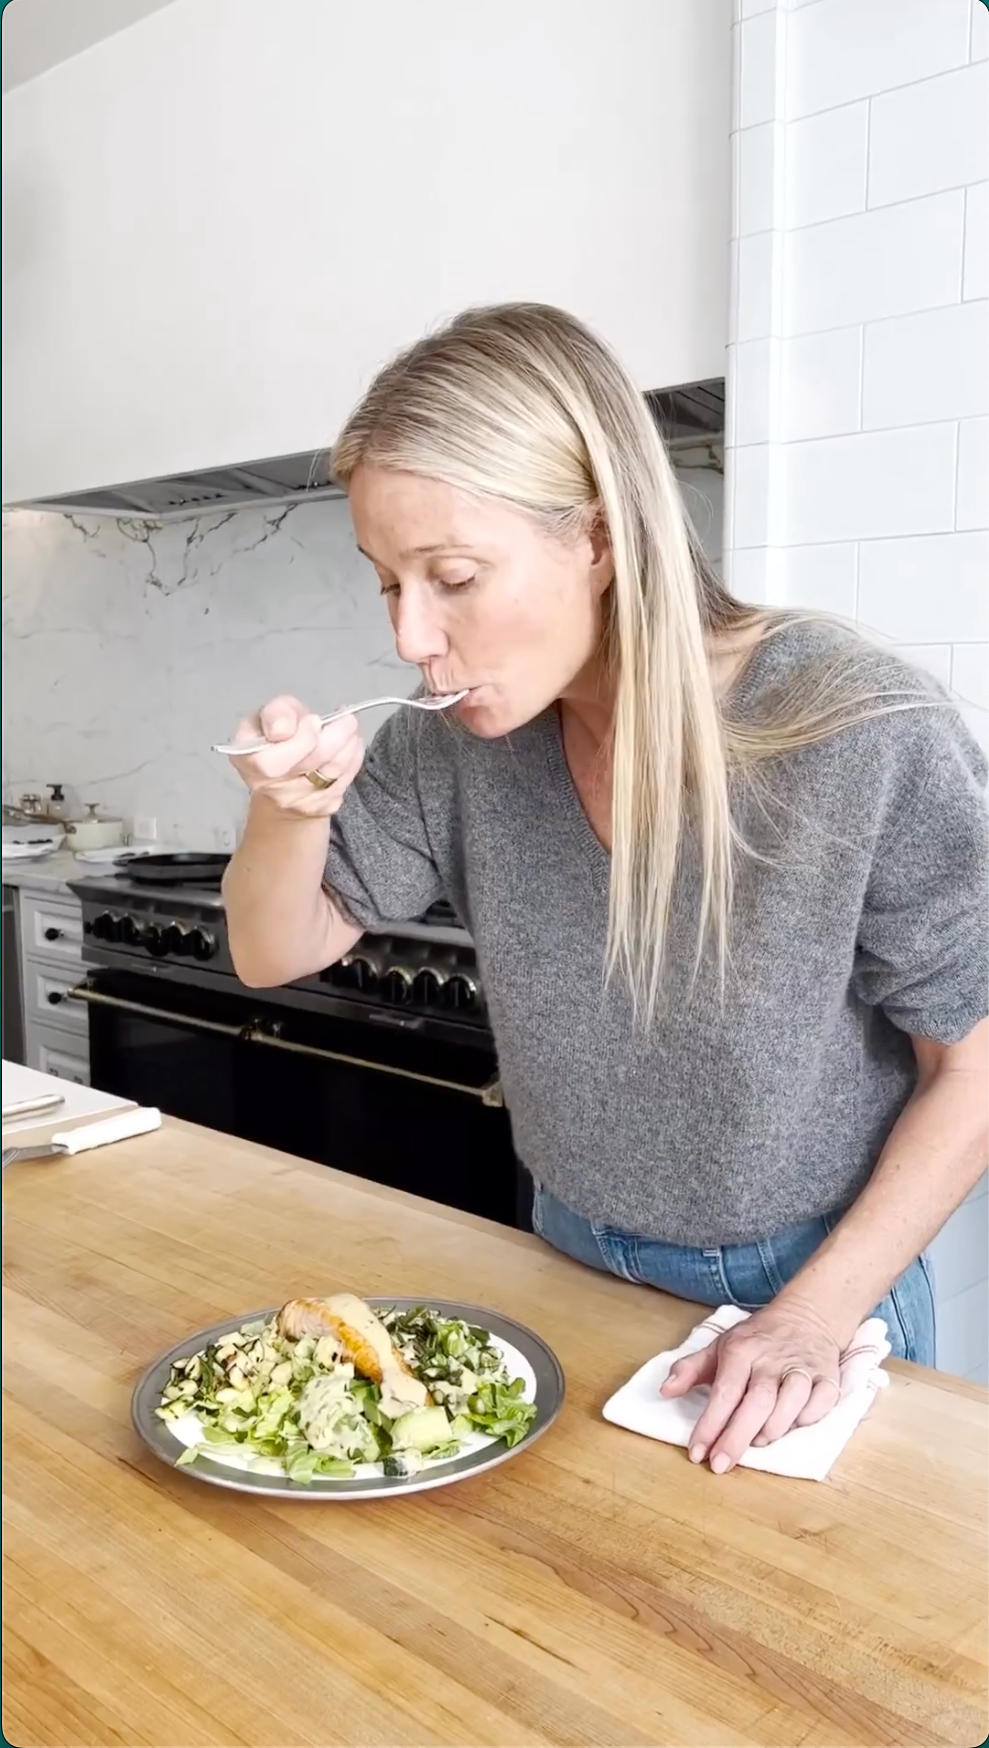 Gwyneth Paltrow Mocked For Adding 'Fat, Fat And Fat' To Her 'Detox' Salad